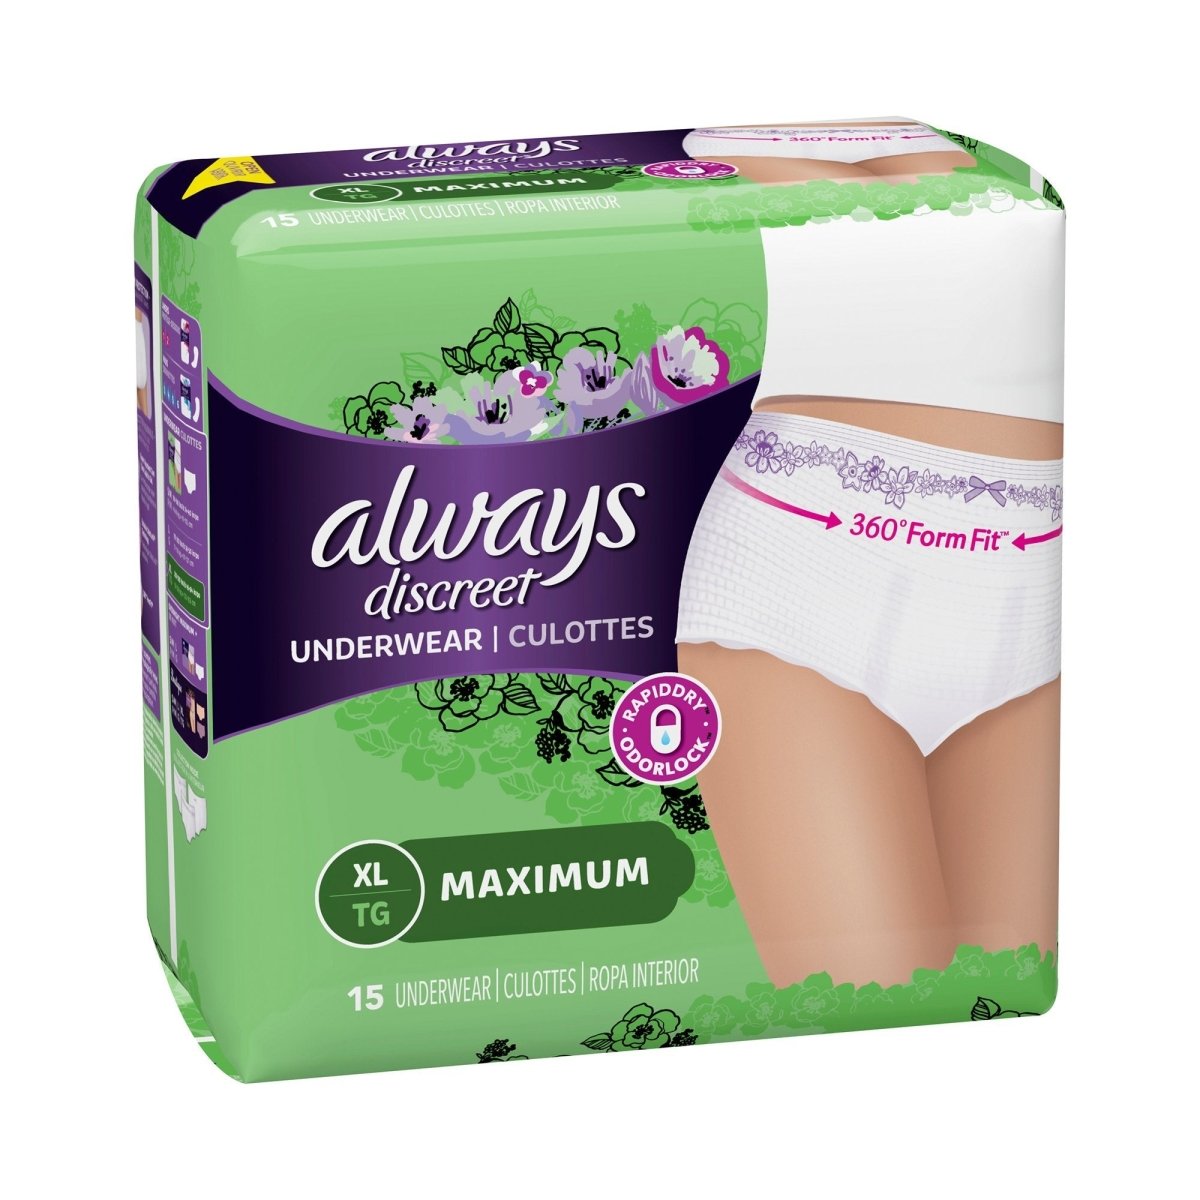 Prevail Unisex Youth Absorbent Underwear, Youth/Small, Extra Absorbency,  Pull on with Tear Away Seams